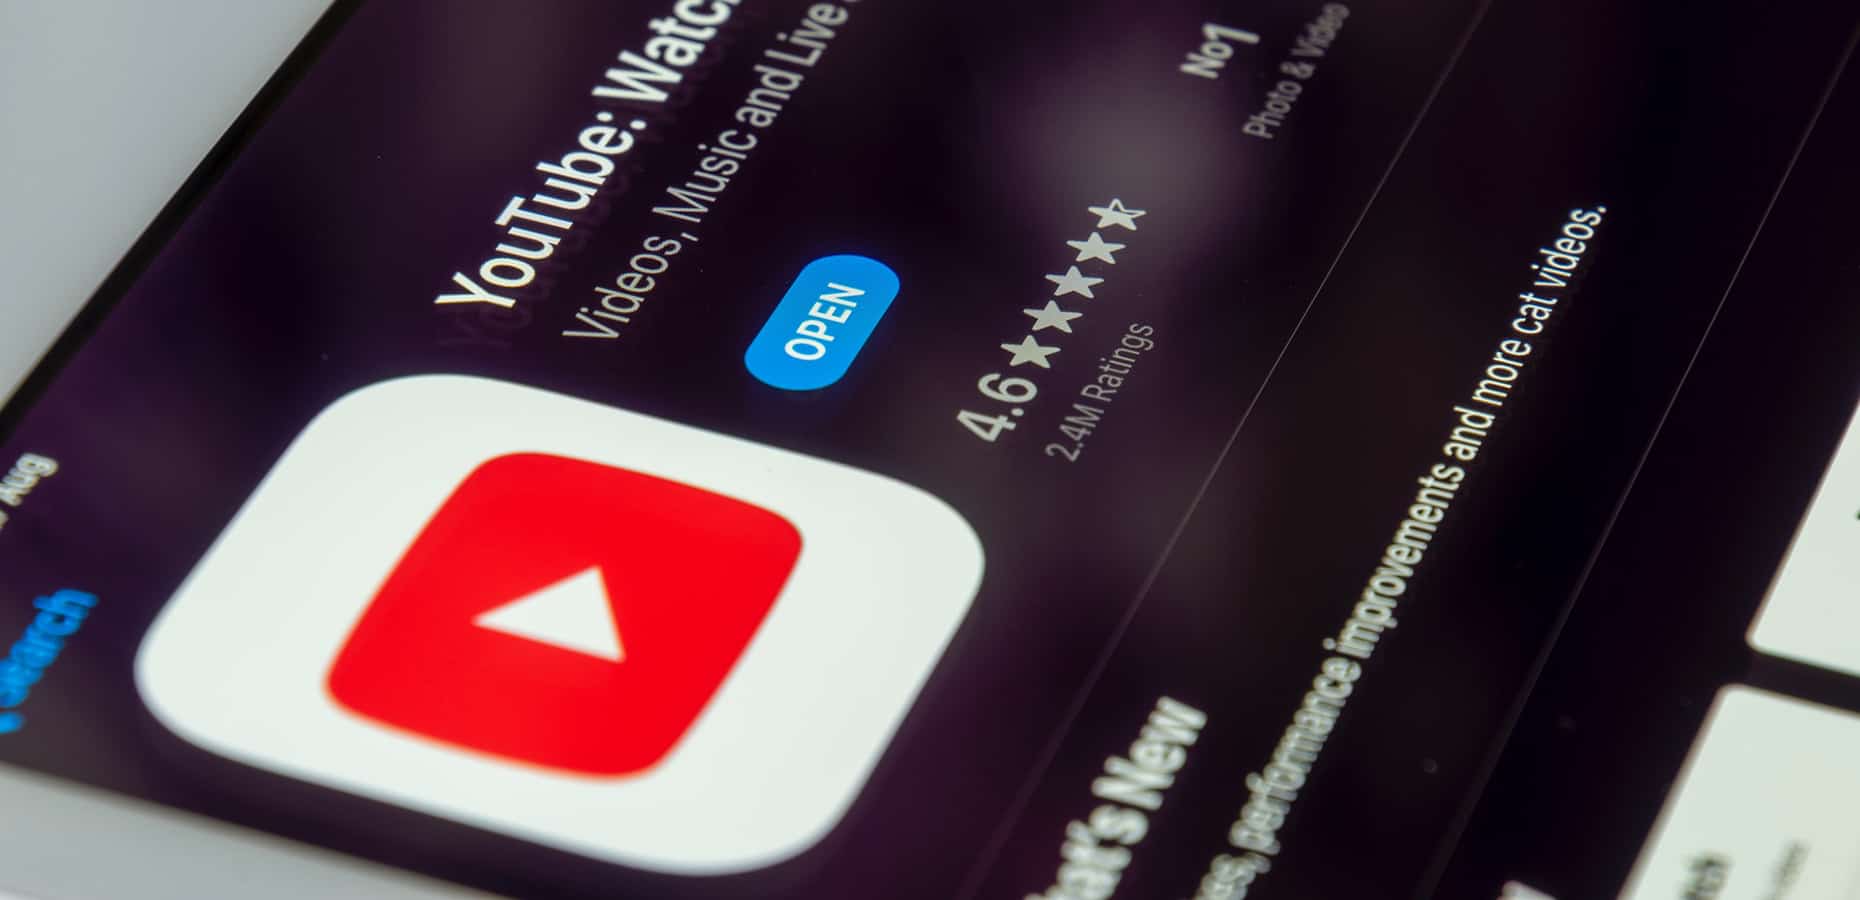 The YouTube logo on an iPad. YouTube Hiring Process: Getting a Job at YouTube